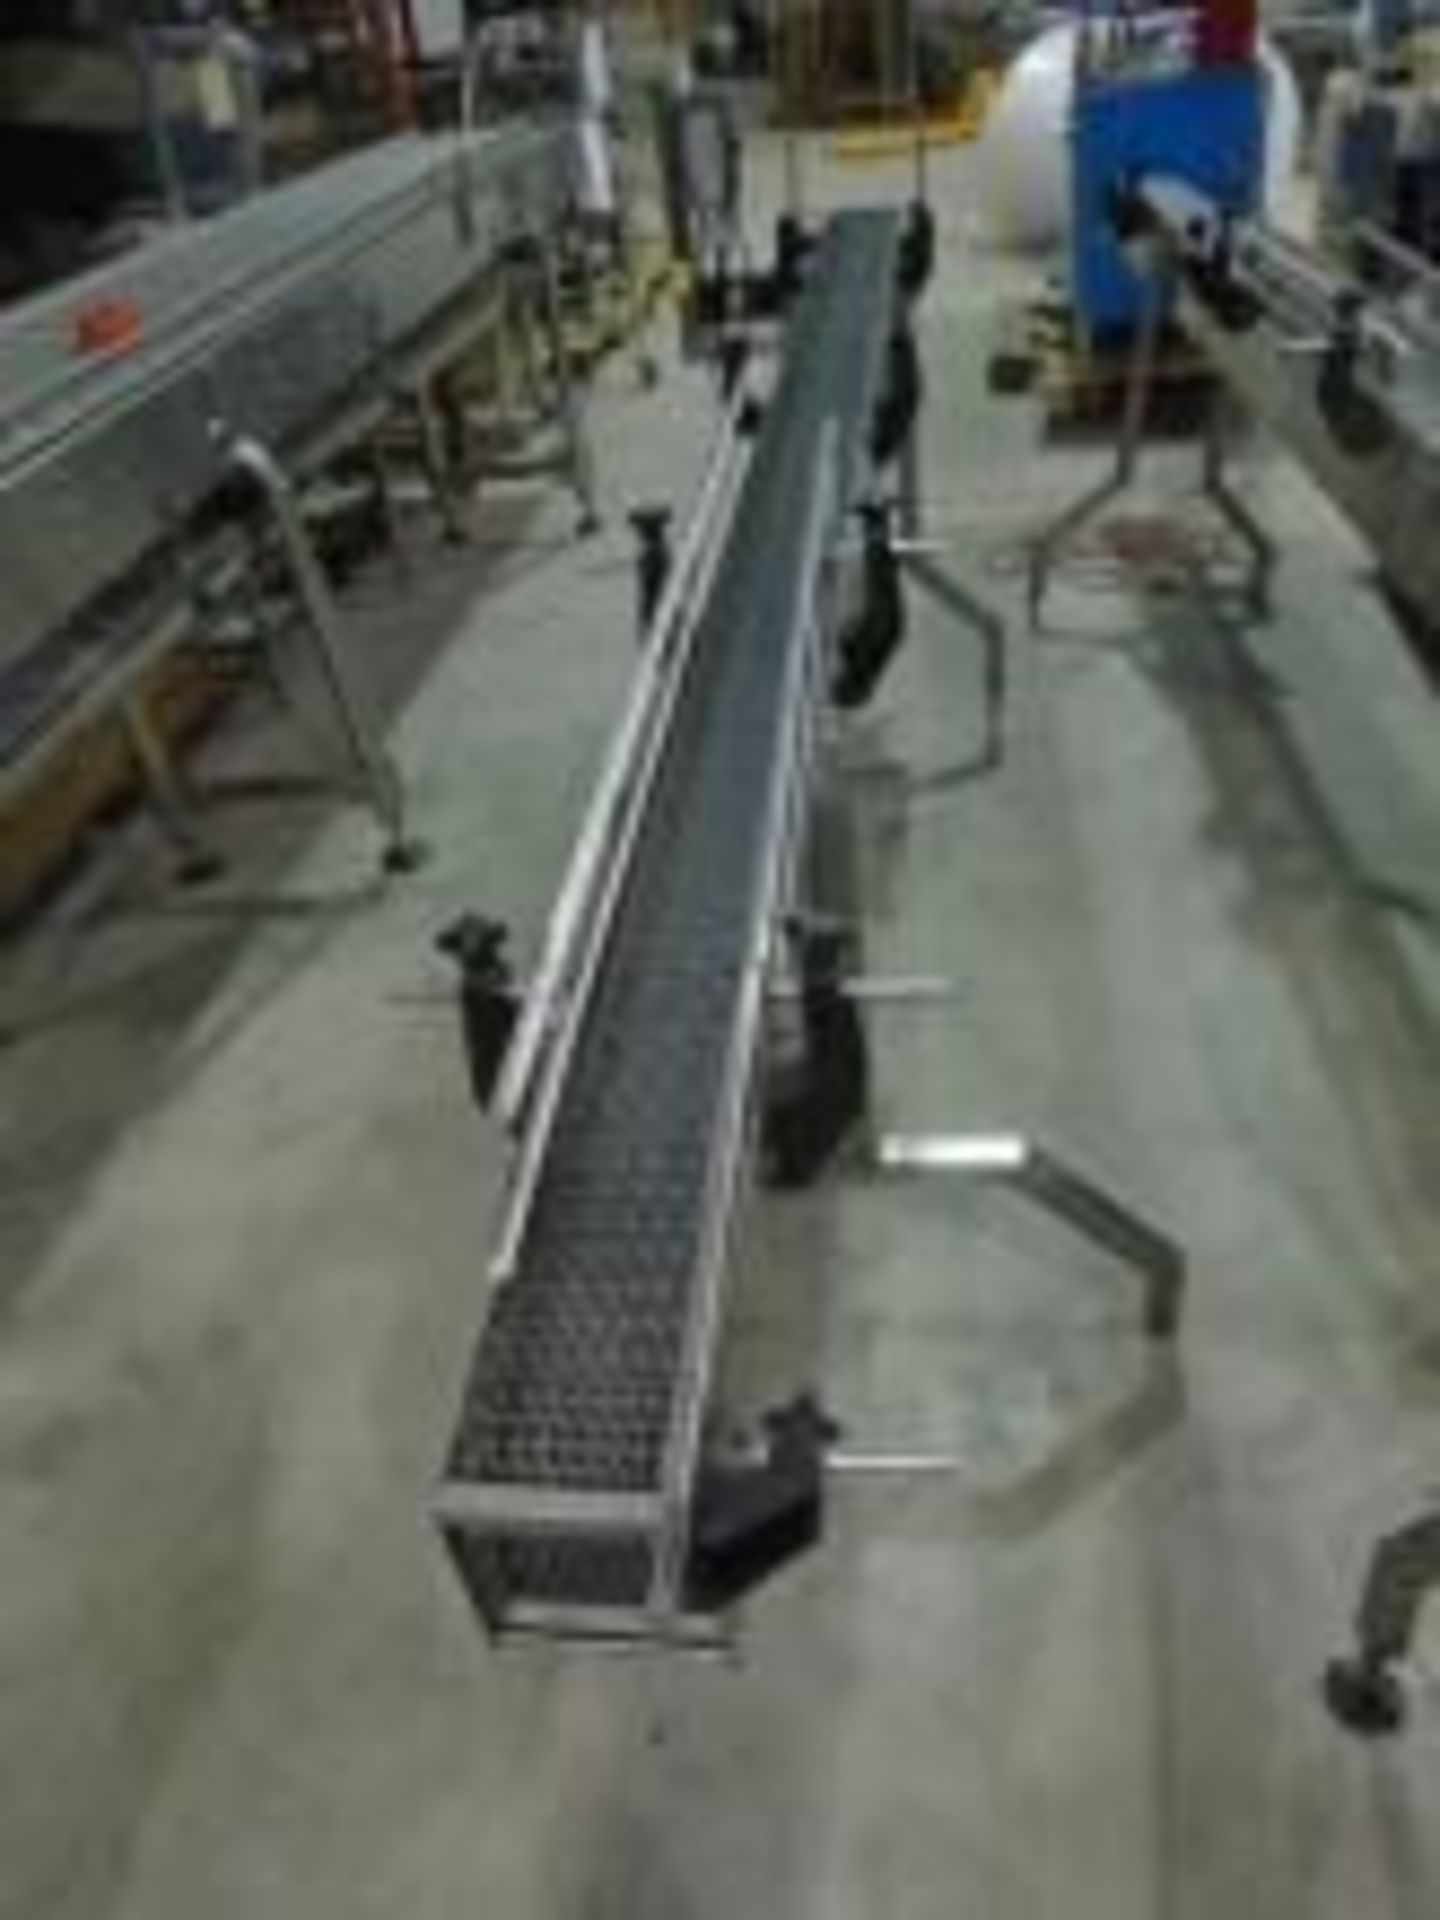 Used 10' Long Conveyor with Plastic Belting that measure 6 Inches in Width.  Electrics: 1Ph/60Hz/